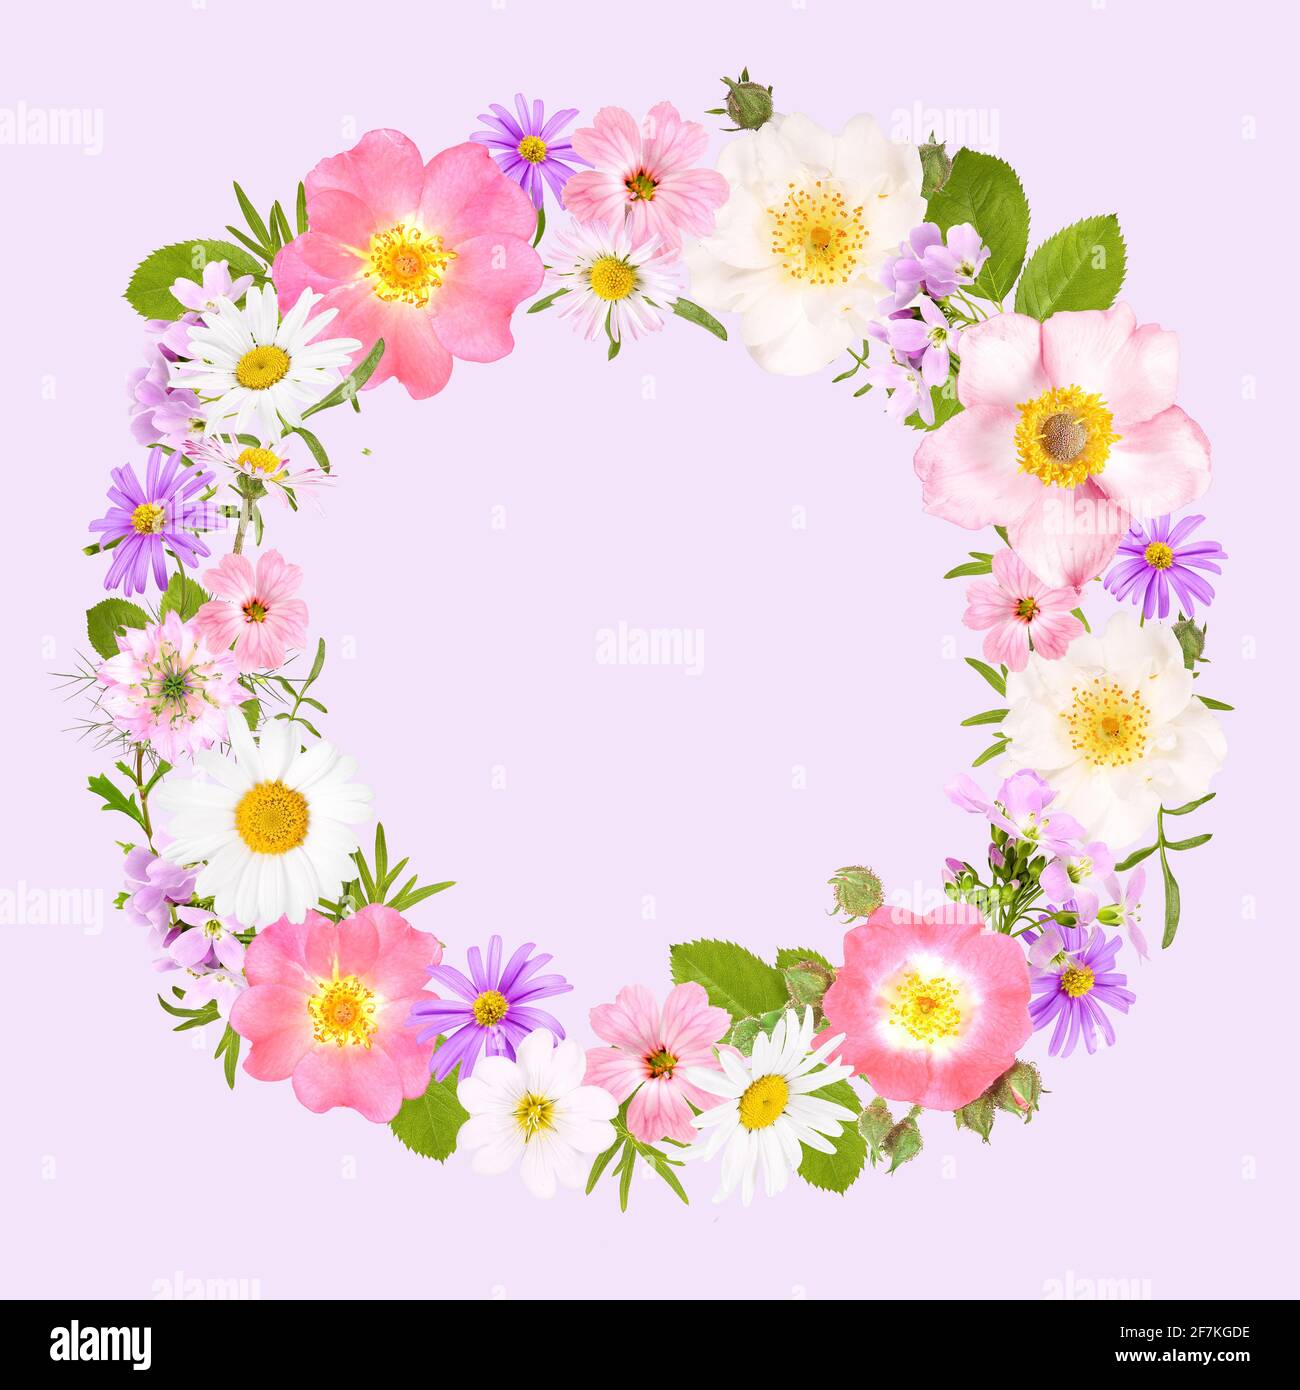 Flower wreath with roses, daisies and other flowers Stock Photo